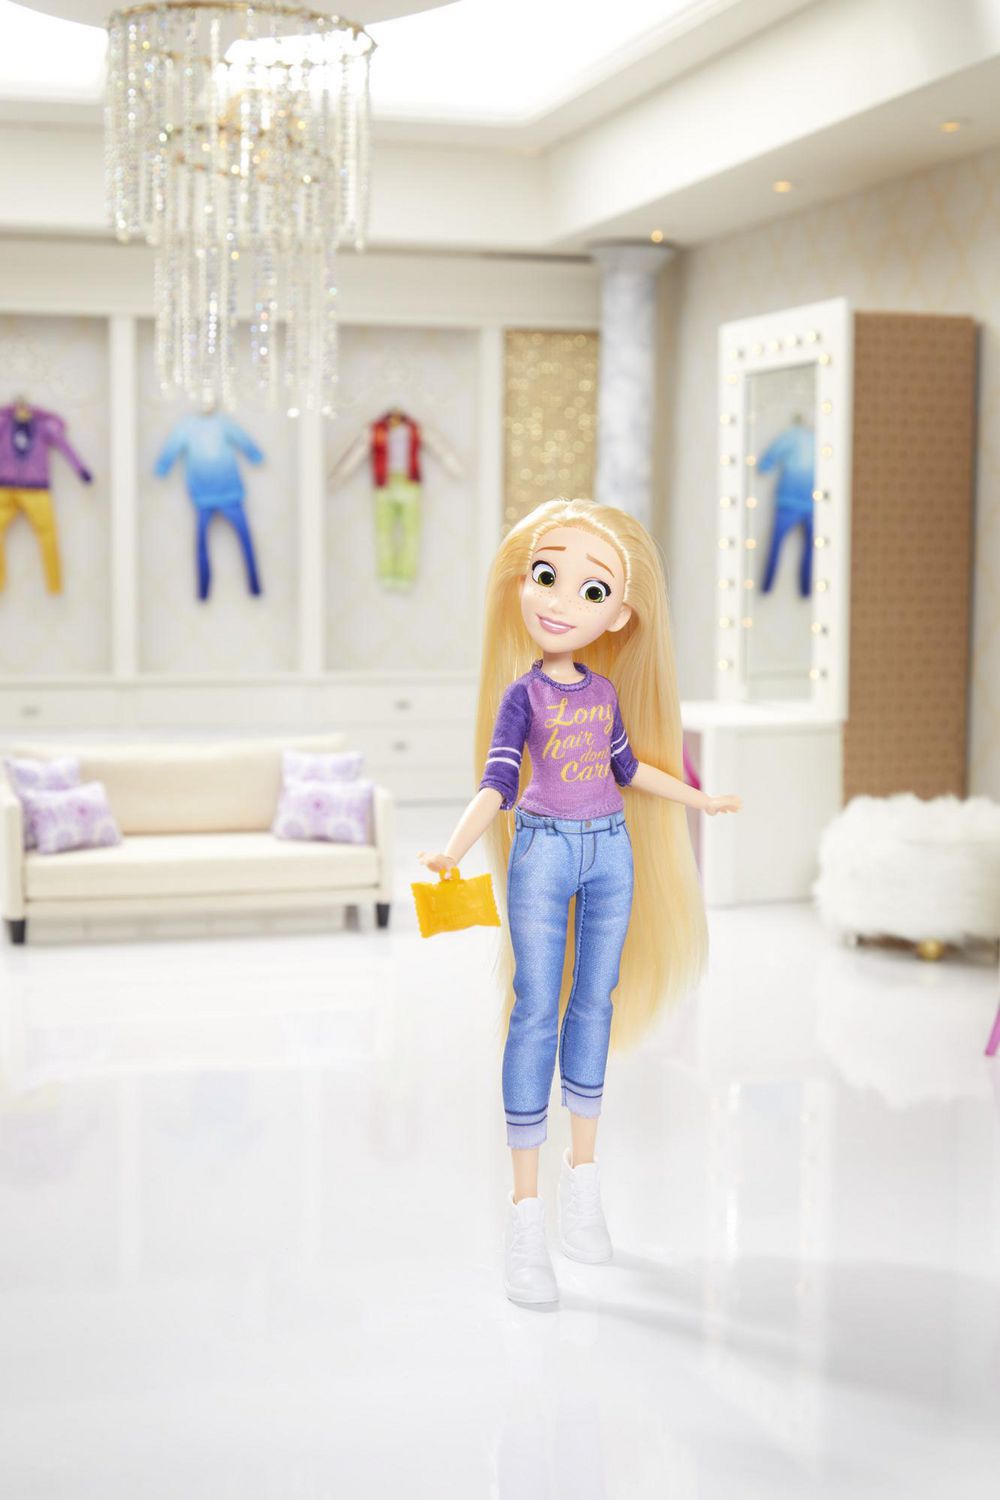 See the Disney princesses lounge around in sweats - CNET